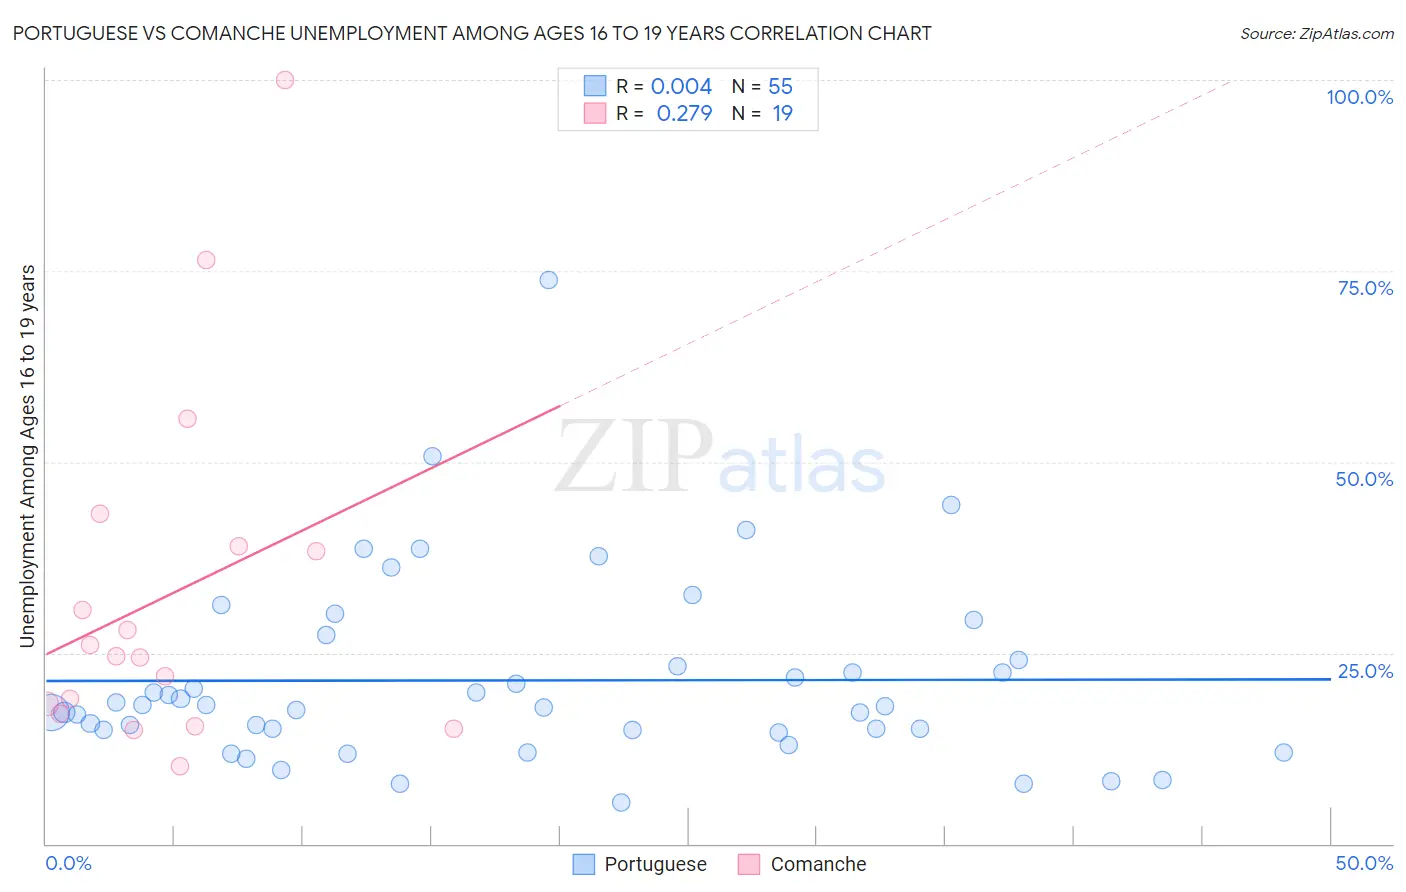 Portuguese vs Comanche Unemployment Among Ages 16 to 19 years